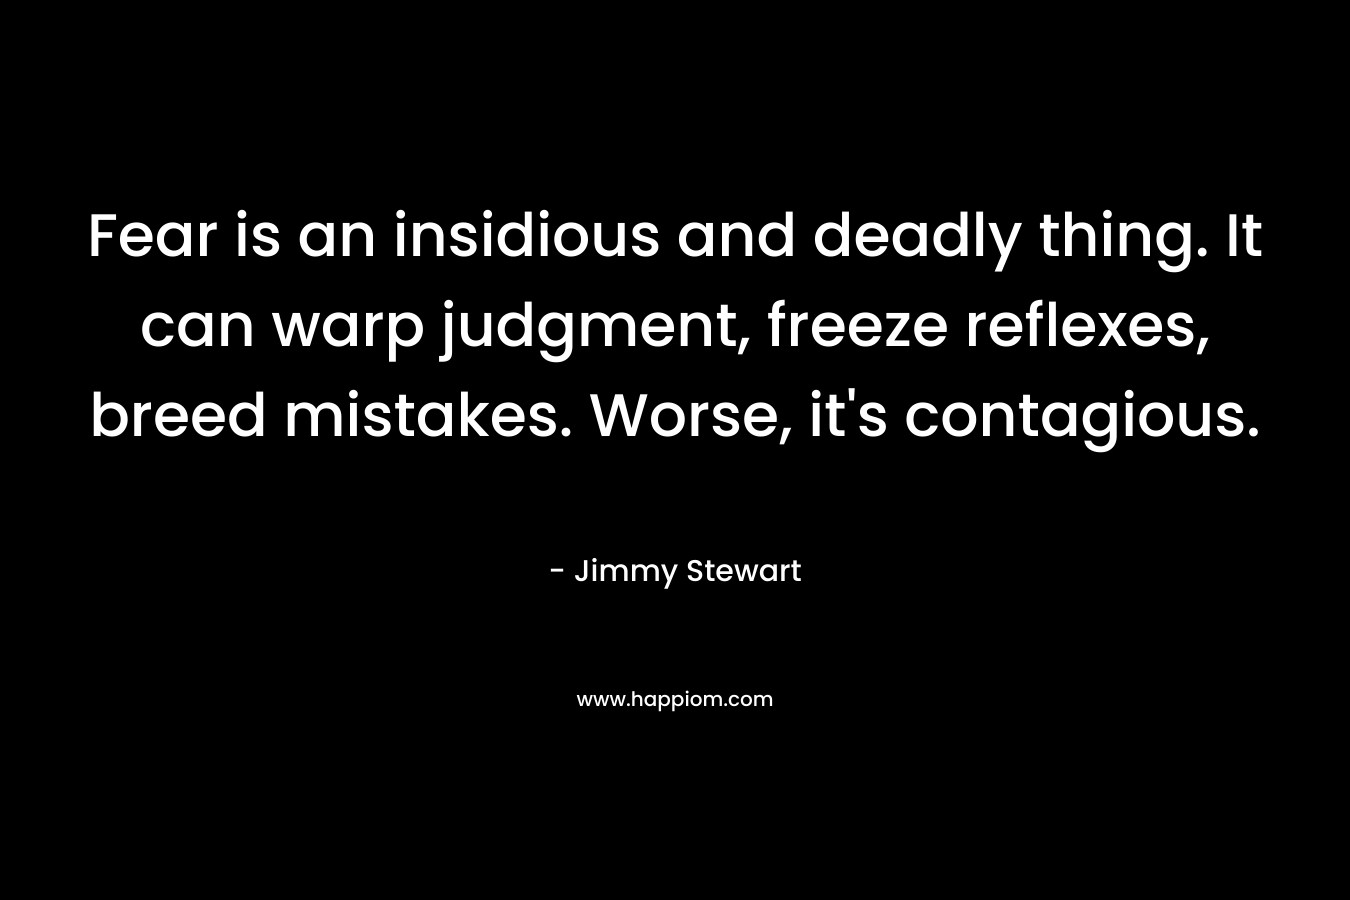 Fear is an insidious and deadly thing. It can warp judgment, freeze reflexes, breed mistakes. Worse, it’s contagious. – Jimmy Stewart